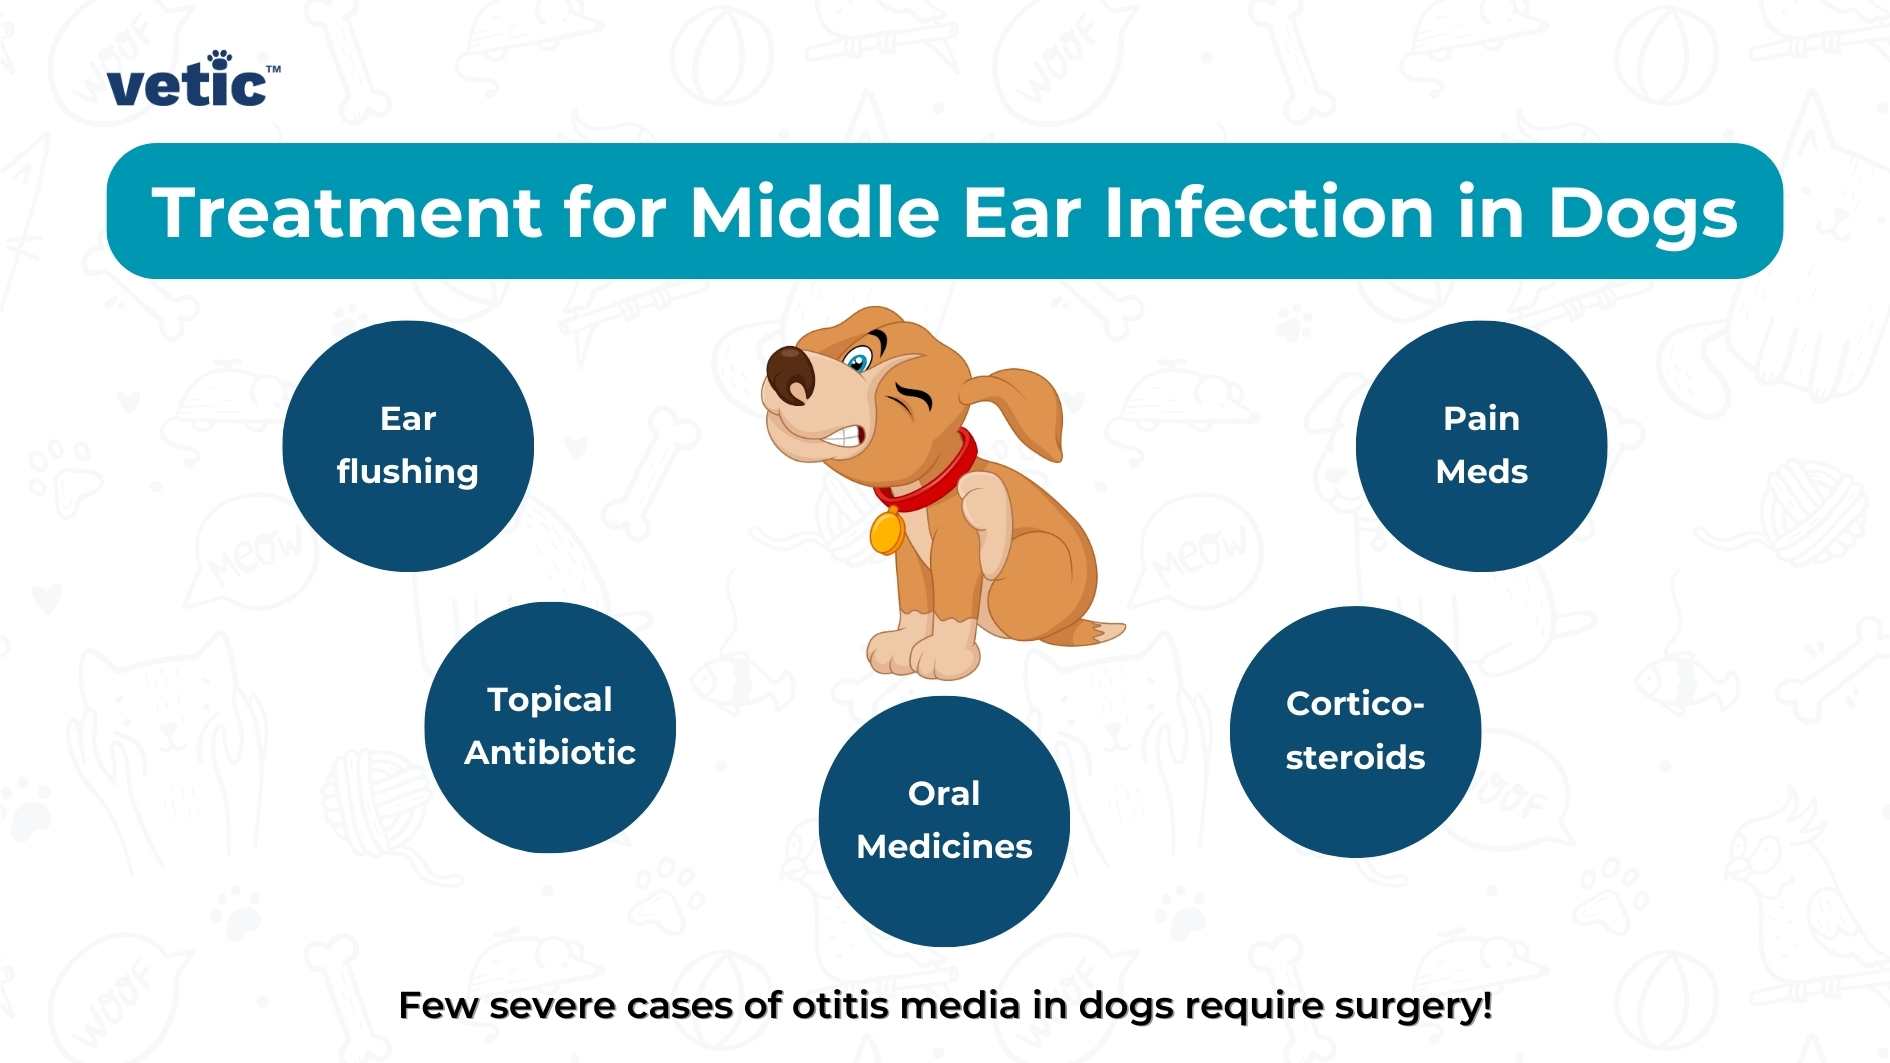 An informational image outlining the treatment for middle ear infection in dogs. The image features a cartoon dog and five blue circles containing text. The circles are labeled ‘Ear flushing,’ ‘Topical Antibiotic,’ ‘Oral Medicines,’ ‘Pain Meds,’ and ‘Cortico-steroids.’ The background has faint outlines of dogs, and there’s a note at the bottom stating, ‘Few severe cases of otitis media in dogs require surgery!’ This image provides various treatment options for middle ear infection in dogs, offering a quick reference for pet owners or veterinarians.